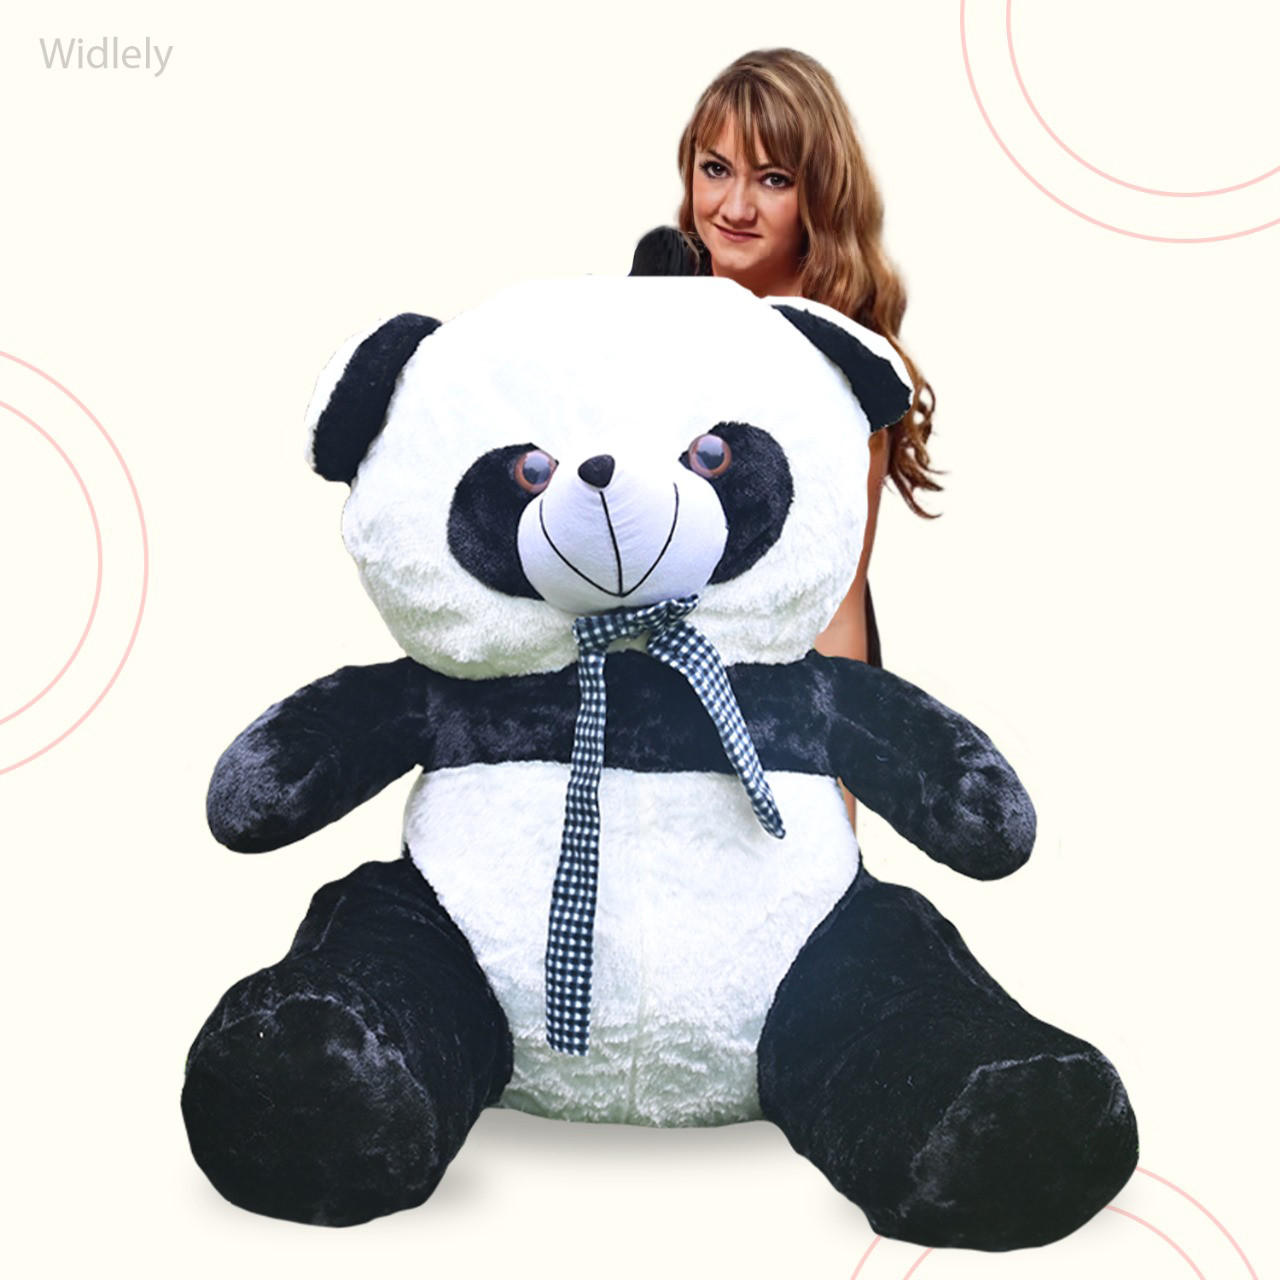 Widlely Panda Teddy Bear with Neck Bow Tie Ribbon | Soft Toys Long Lovable Cute Giant Size | Best Gift for Birthday & Valentine (5 Feet)